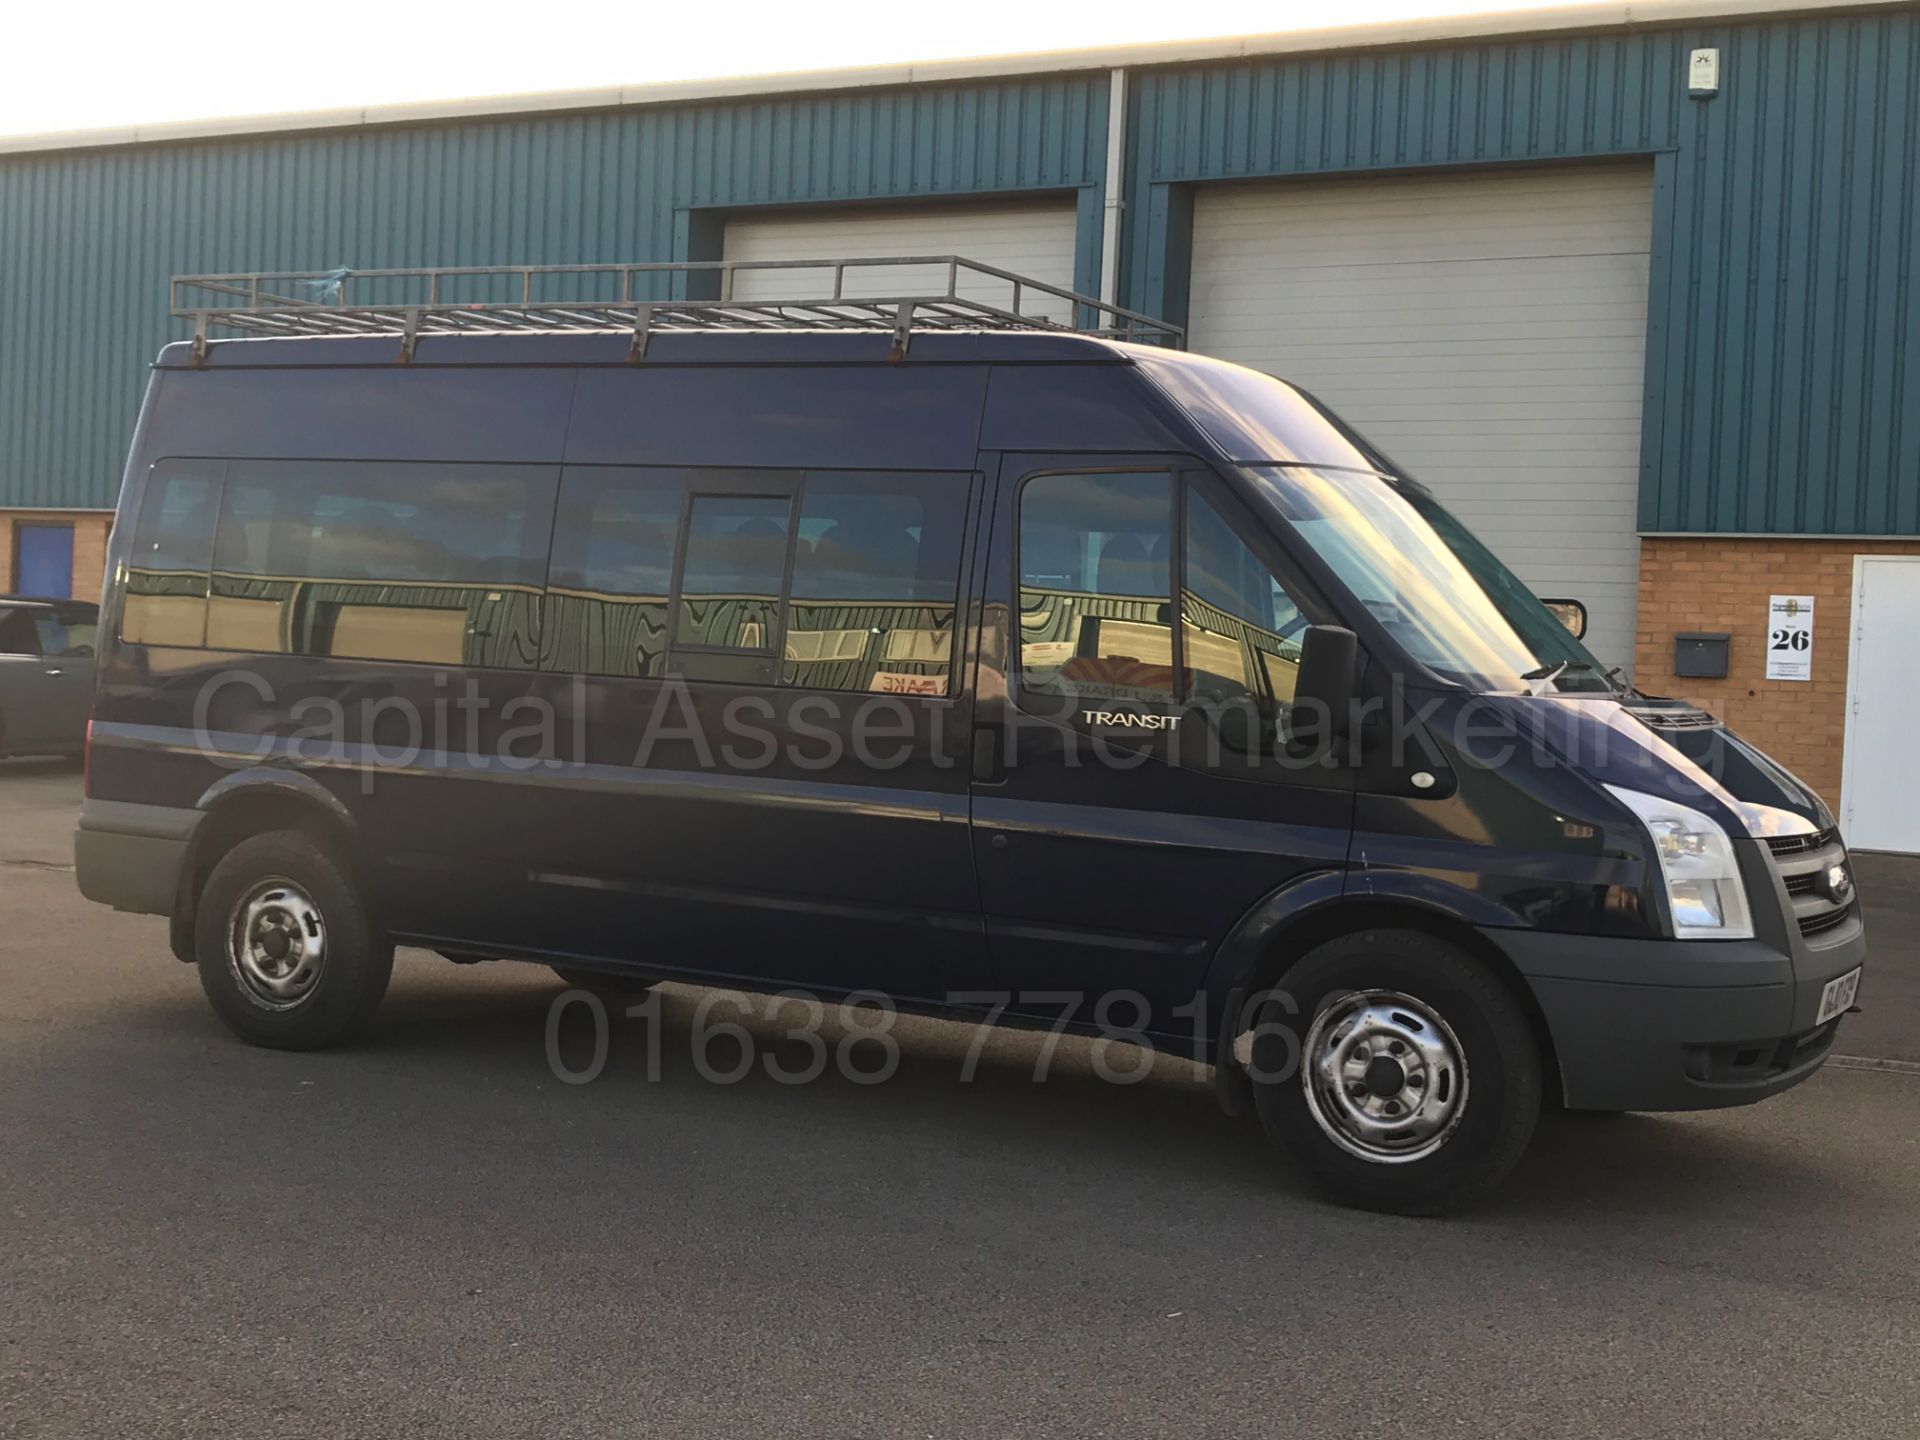 FORD TRANSIT 100 T350 '15 SEATER MINI-BUS' (2010 - 10 REG) '2.4 TDCI - 100 BHP - 5 SPEED' *AIR CON* - Image 10 of 28